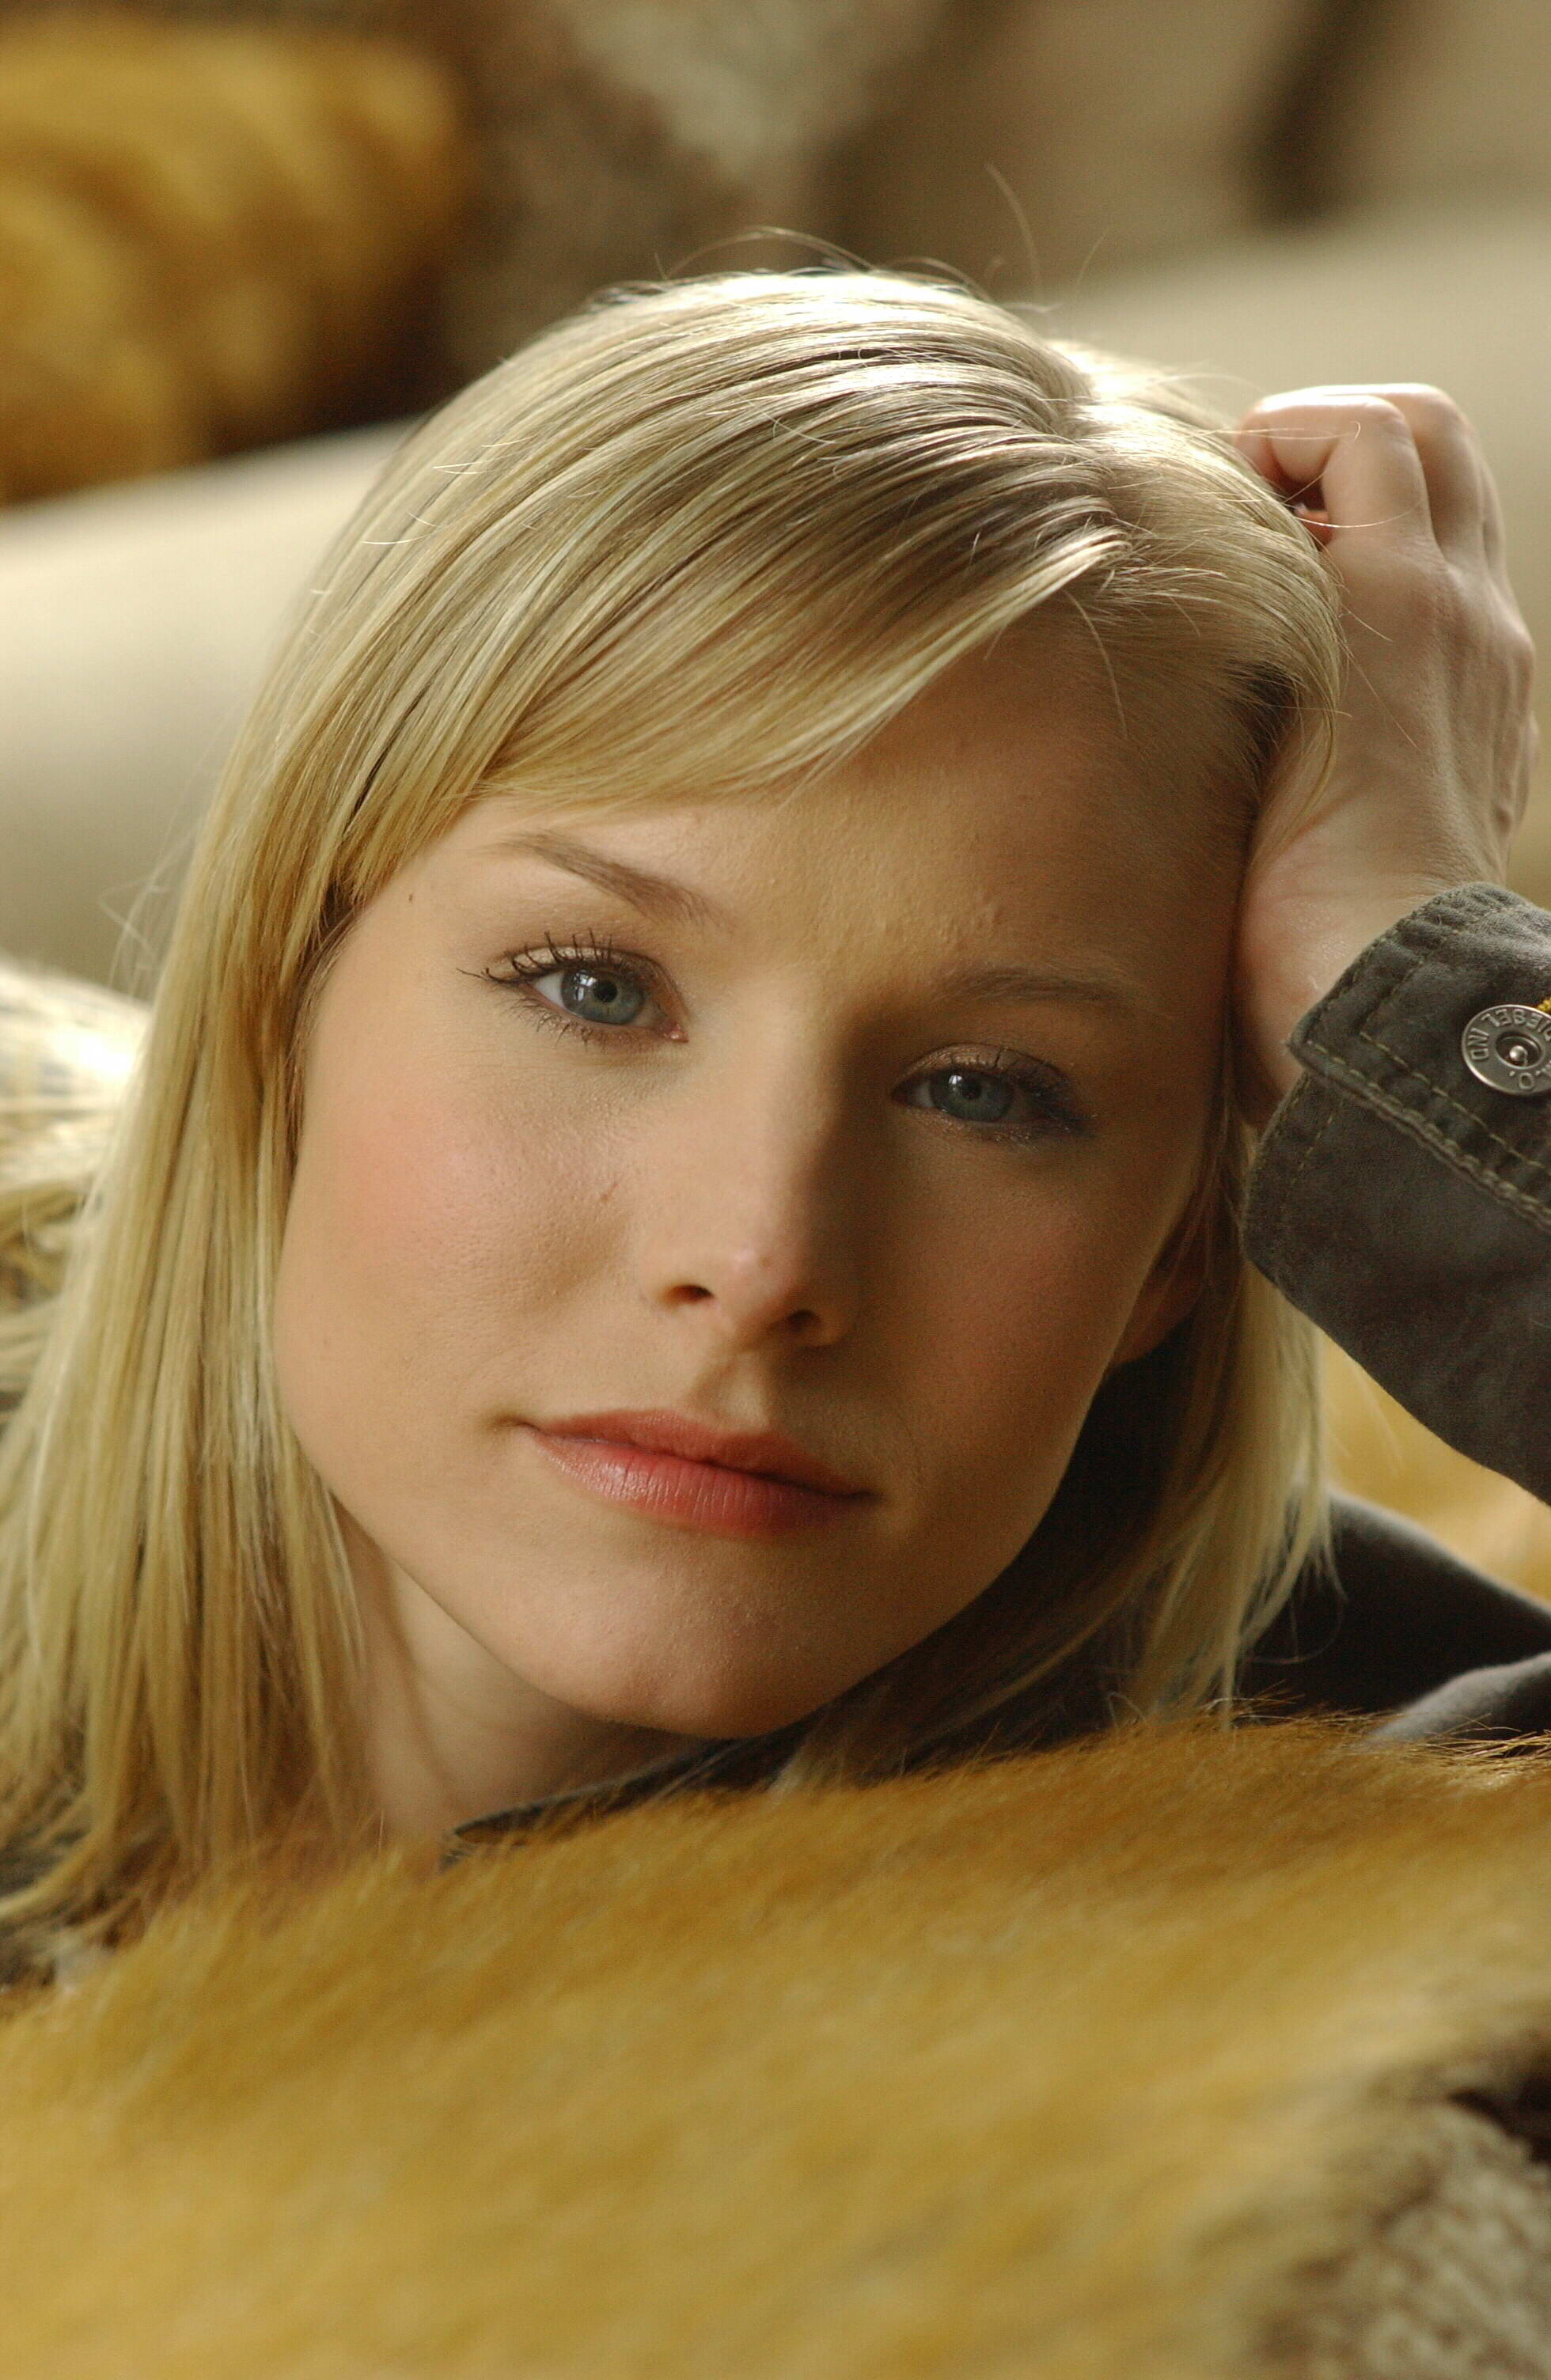 Kristen Bell photo 337 of 914 pics, wallpaper - photo #372180 - ThePlace2